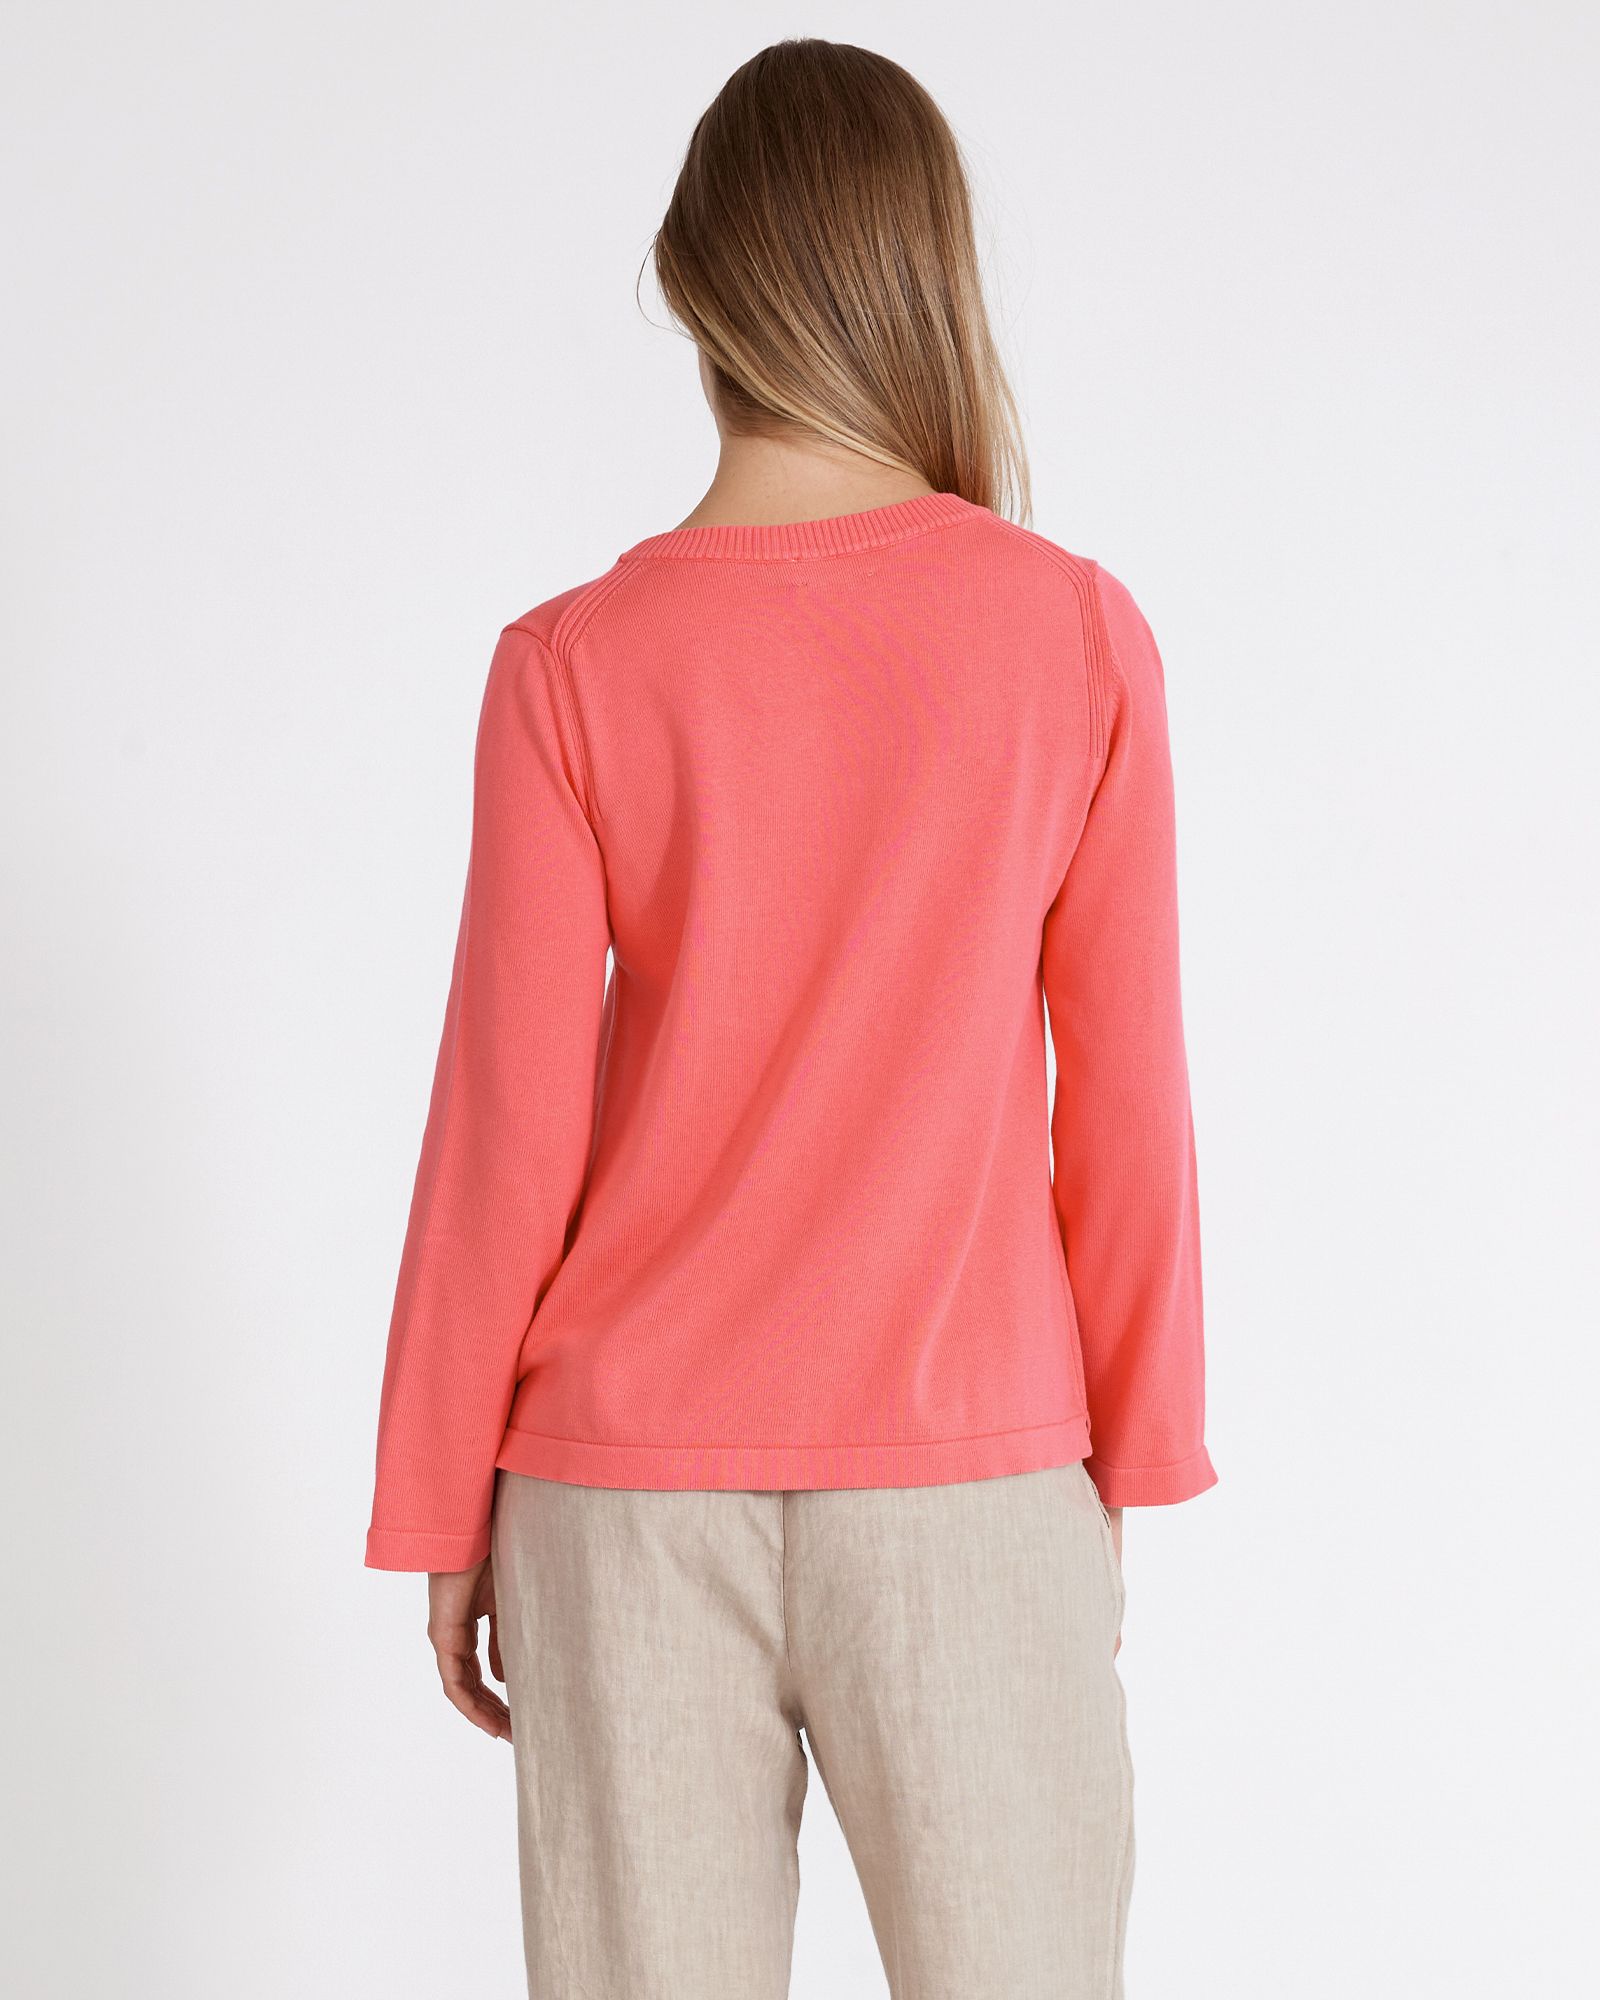 Hulda Knitted Crew Neck Sweater - Coral Pink